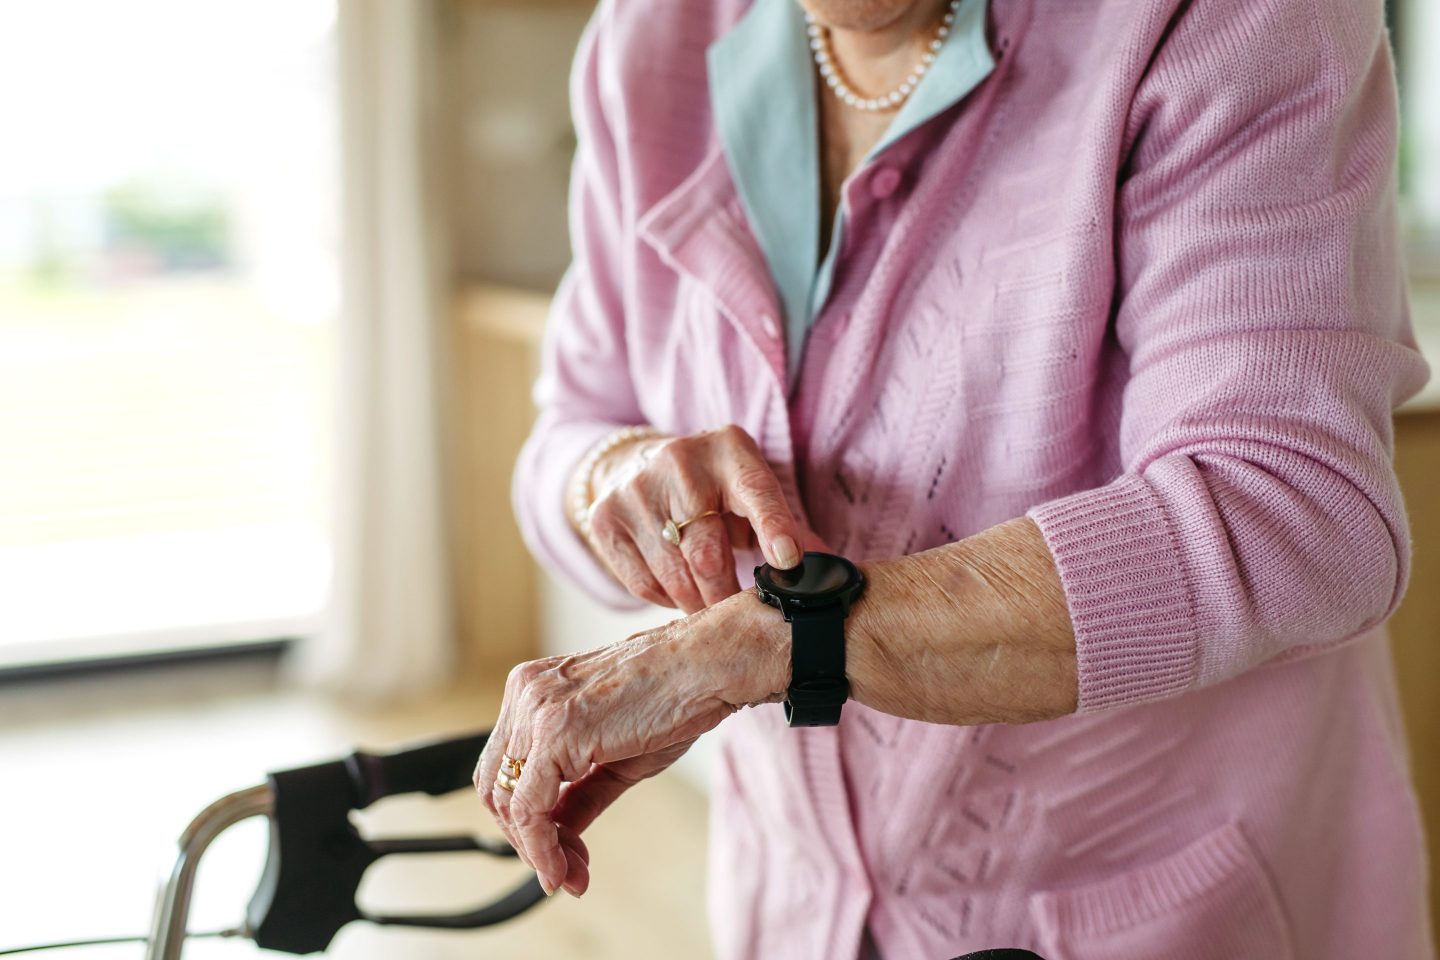 Close up of Elderly woman looking at medical alert watches on her wrist. Personal emergency response systems watches, designed for seniors to call for help in emergencies.